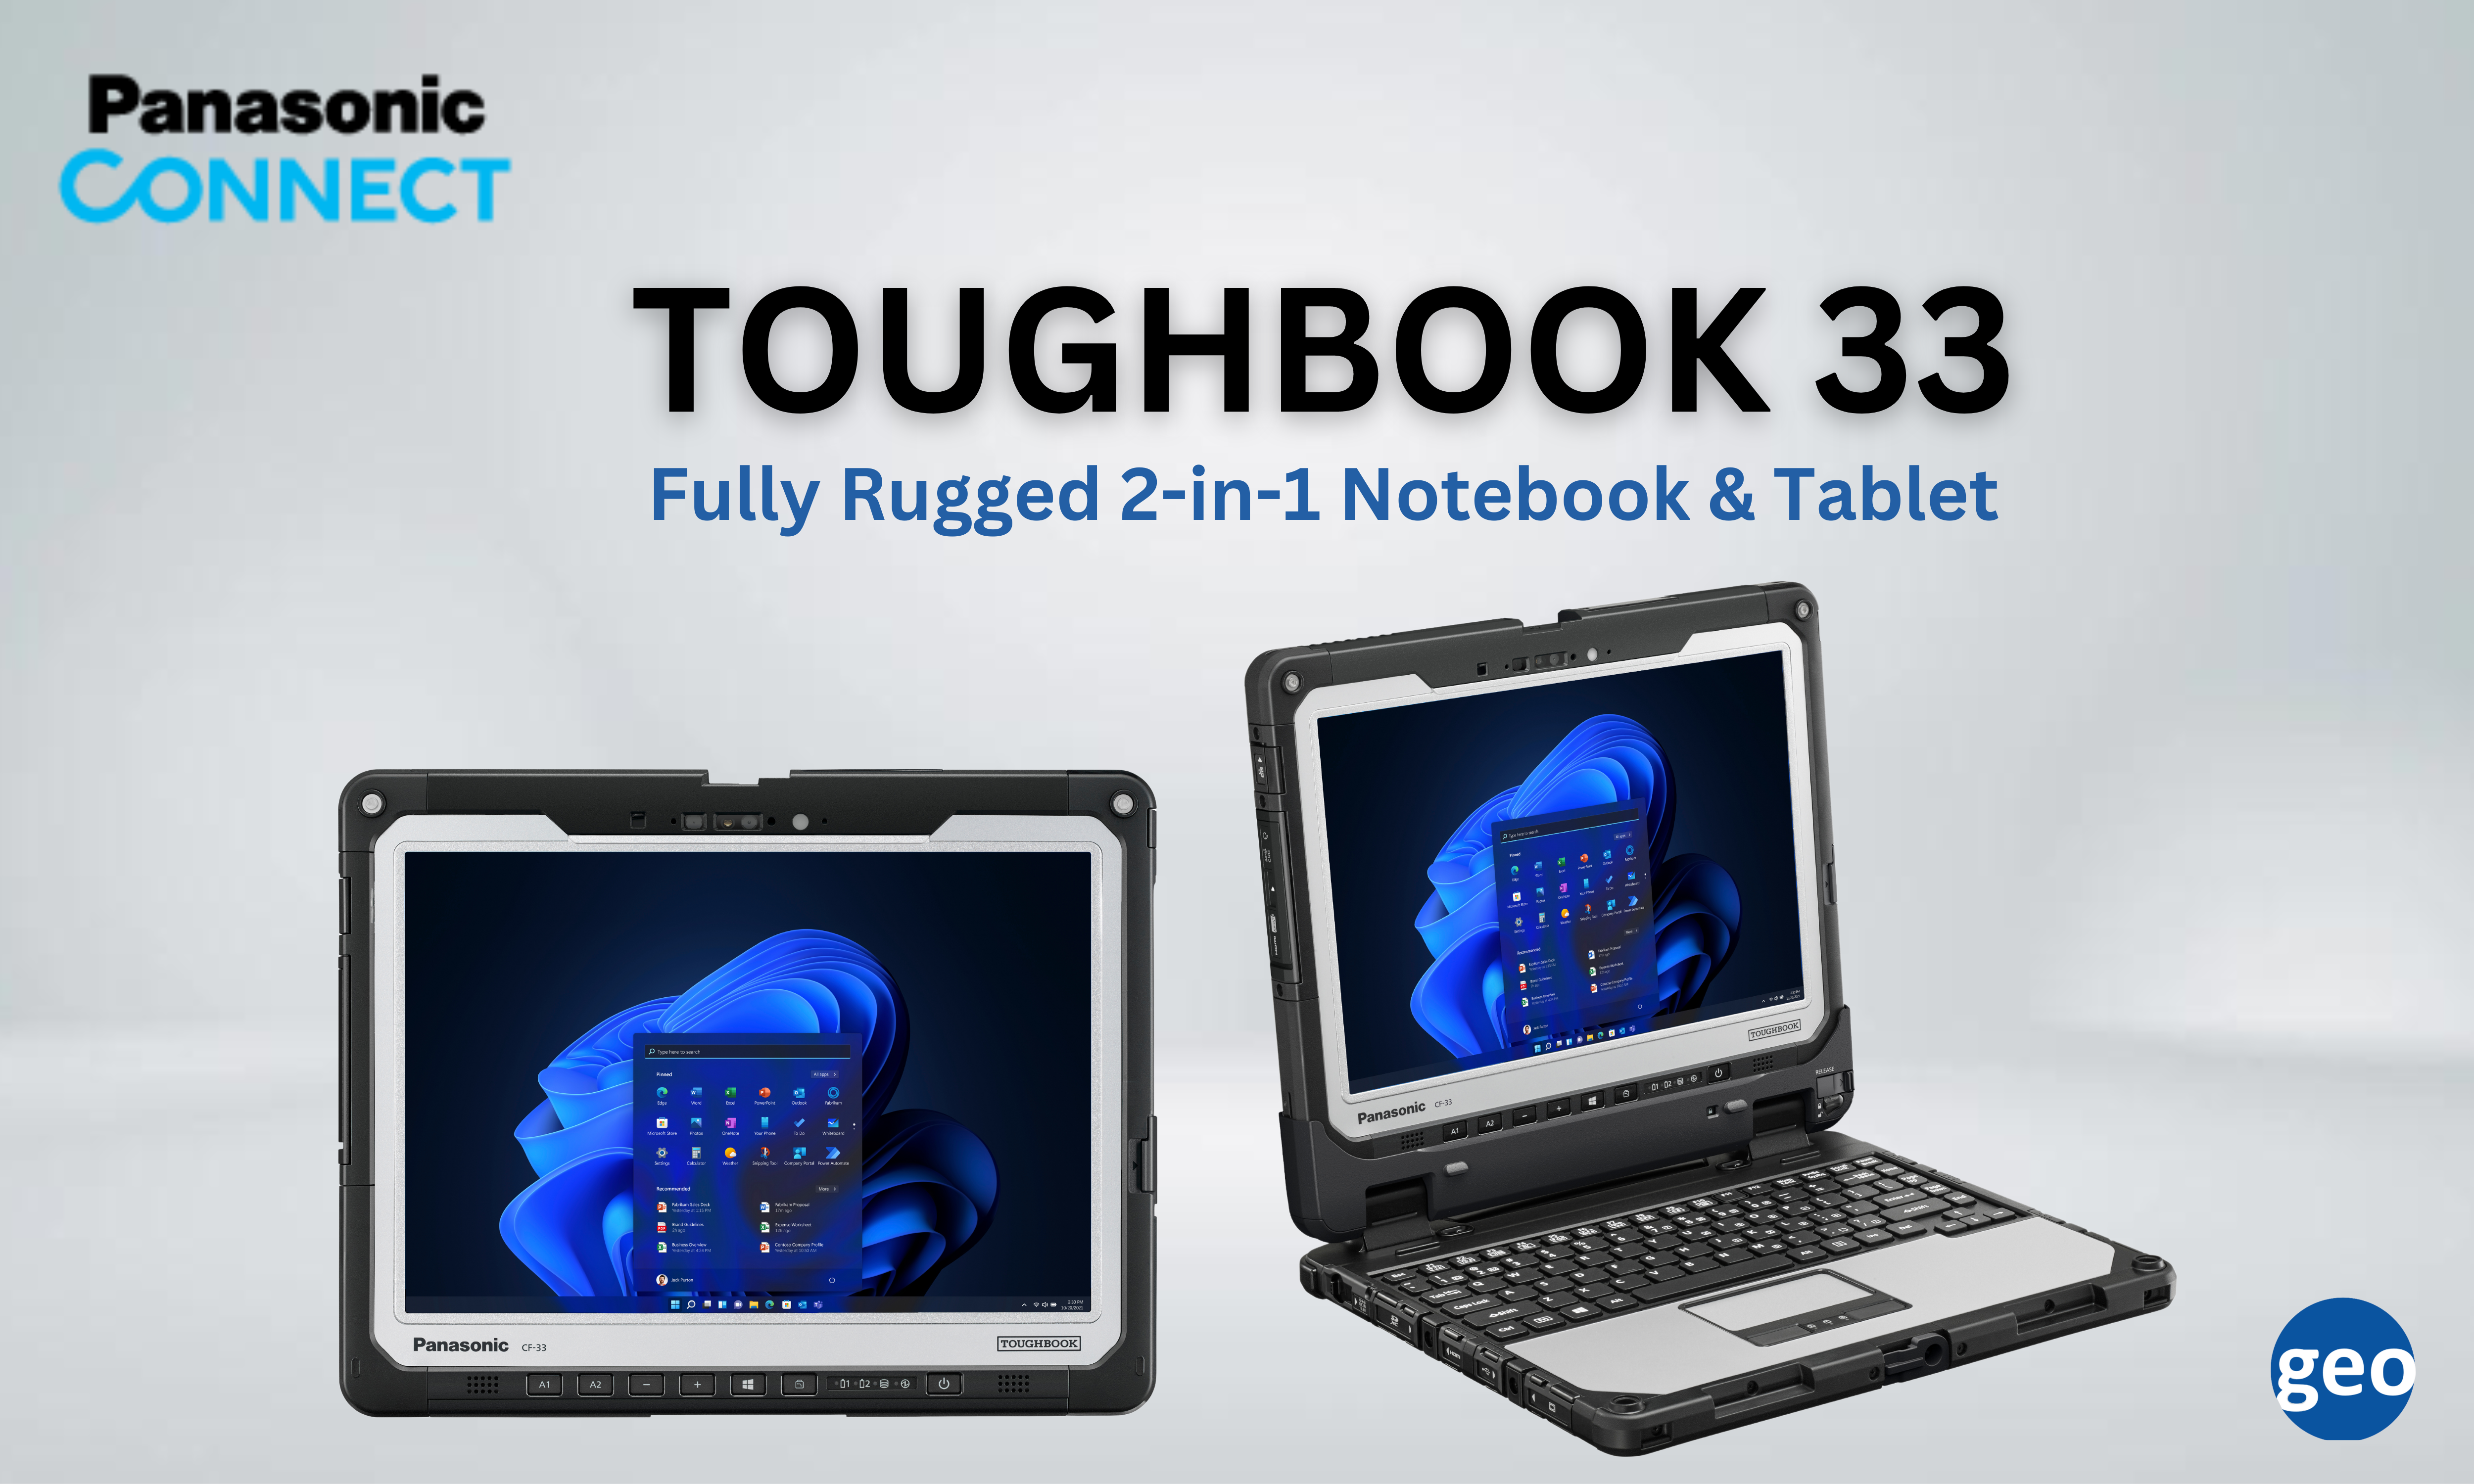 Panasonic: TOUGHBOOK 33 Fully Rugged 2-in-1 Notebook & Tablet